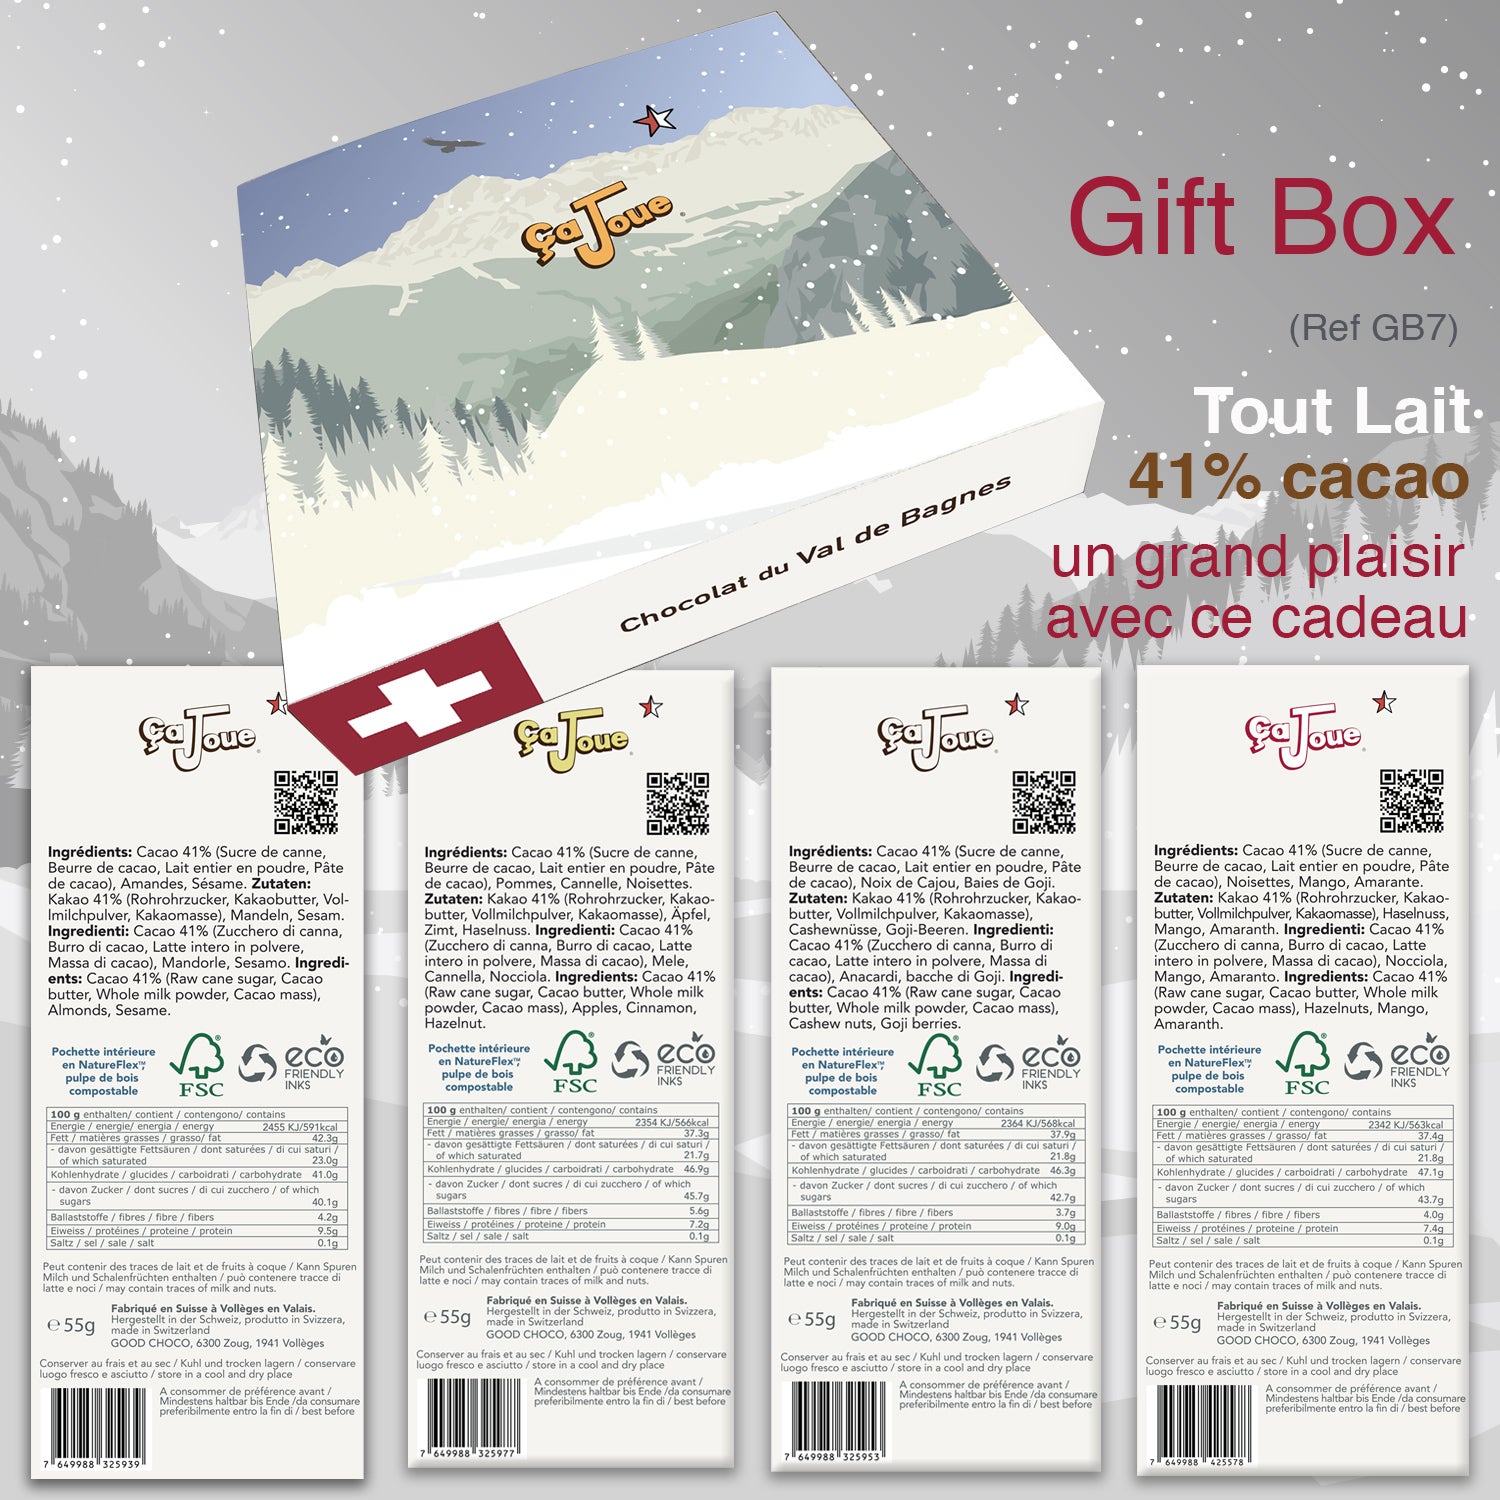 Gift Box (Ref GB7) Chocolate from Val de Bagnes